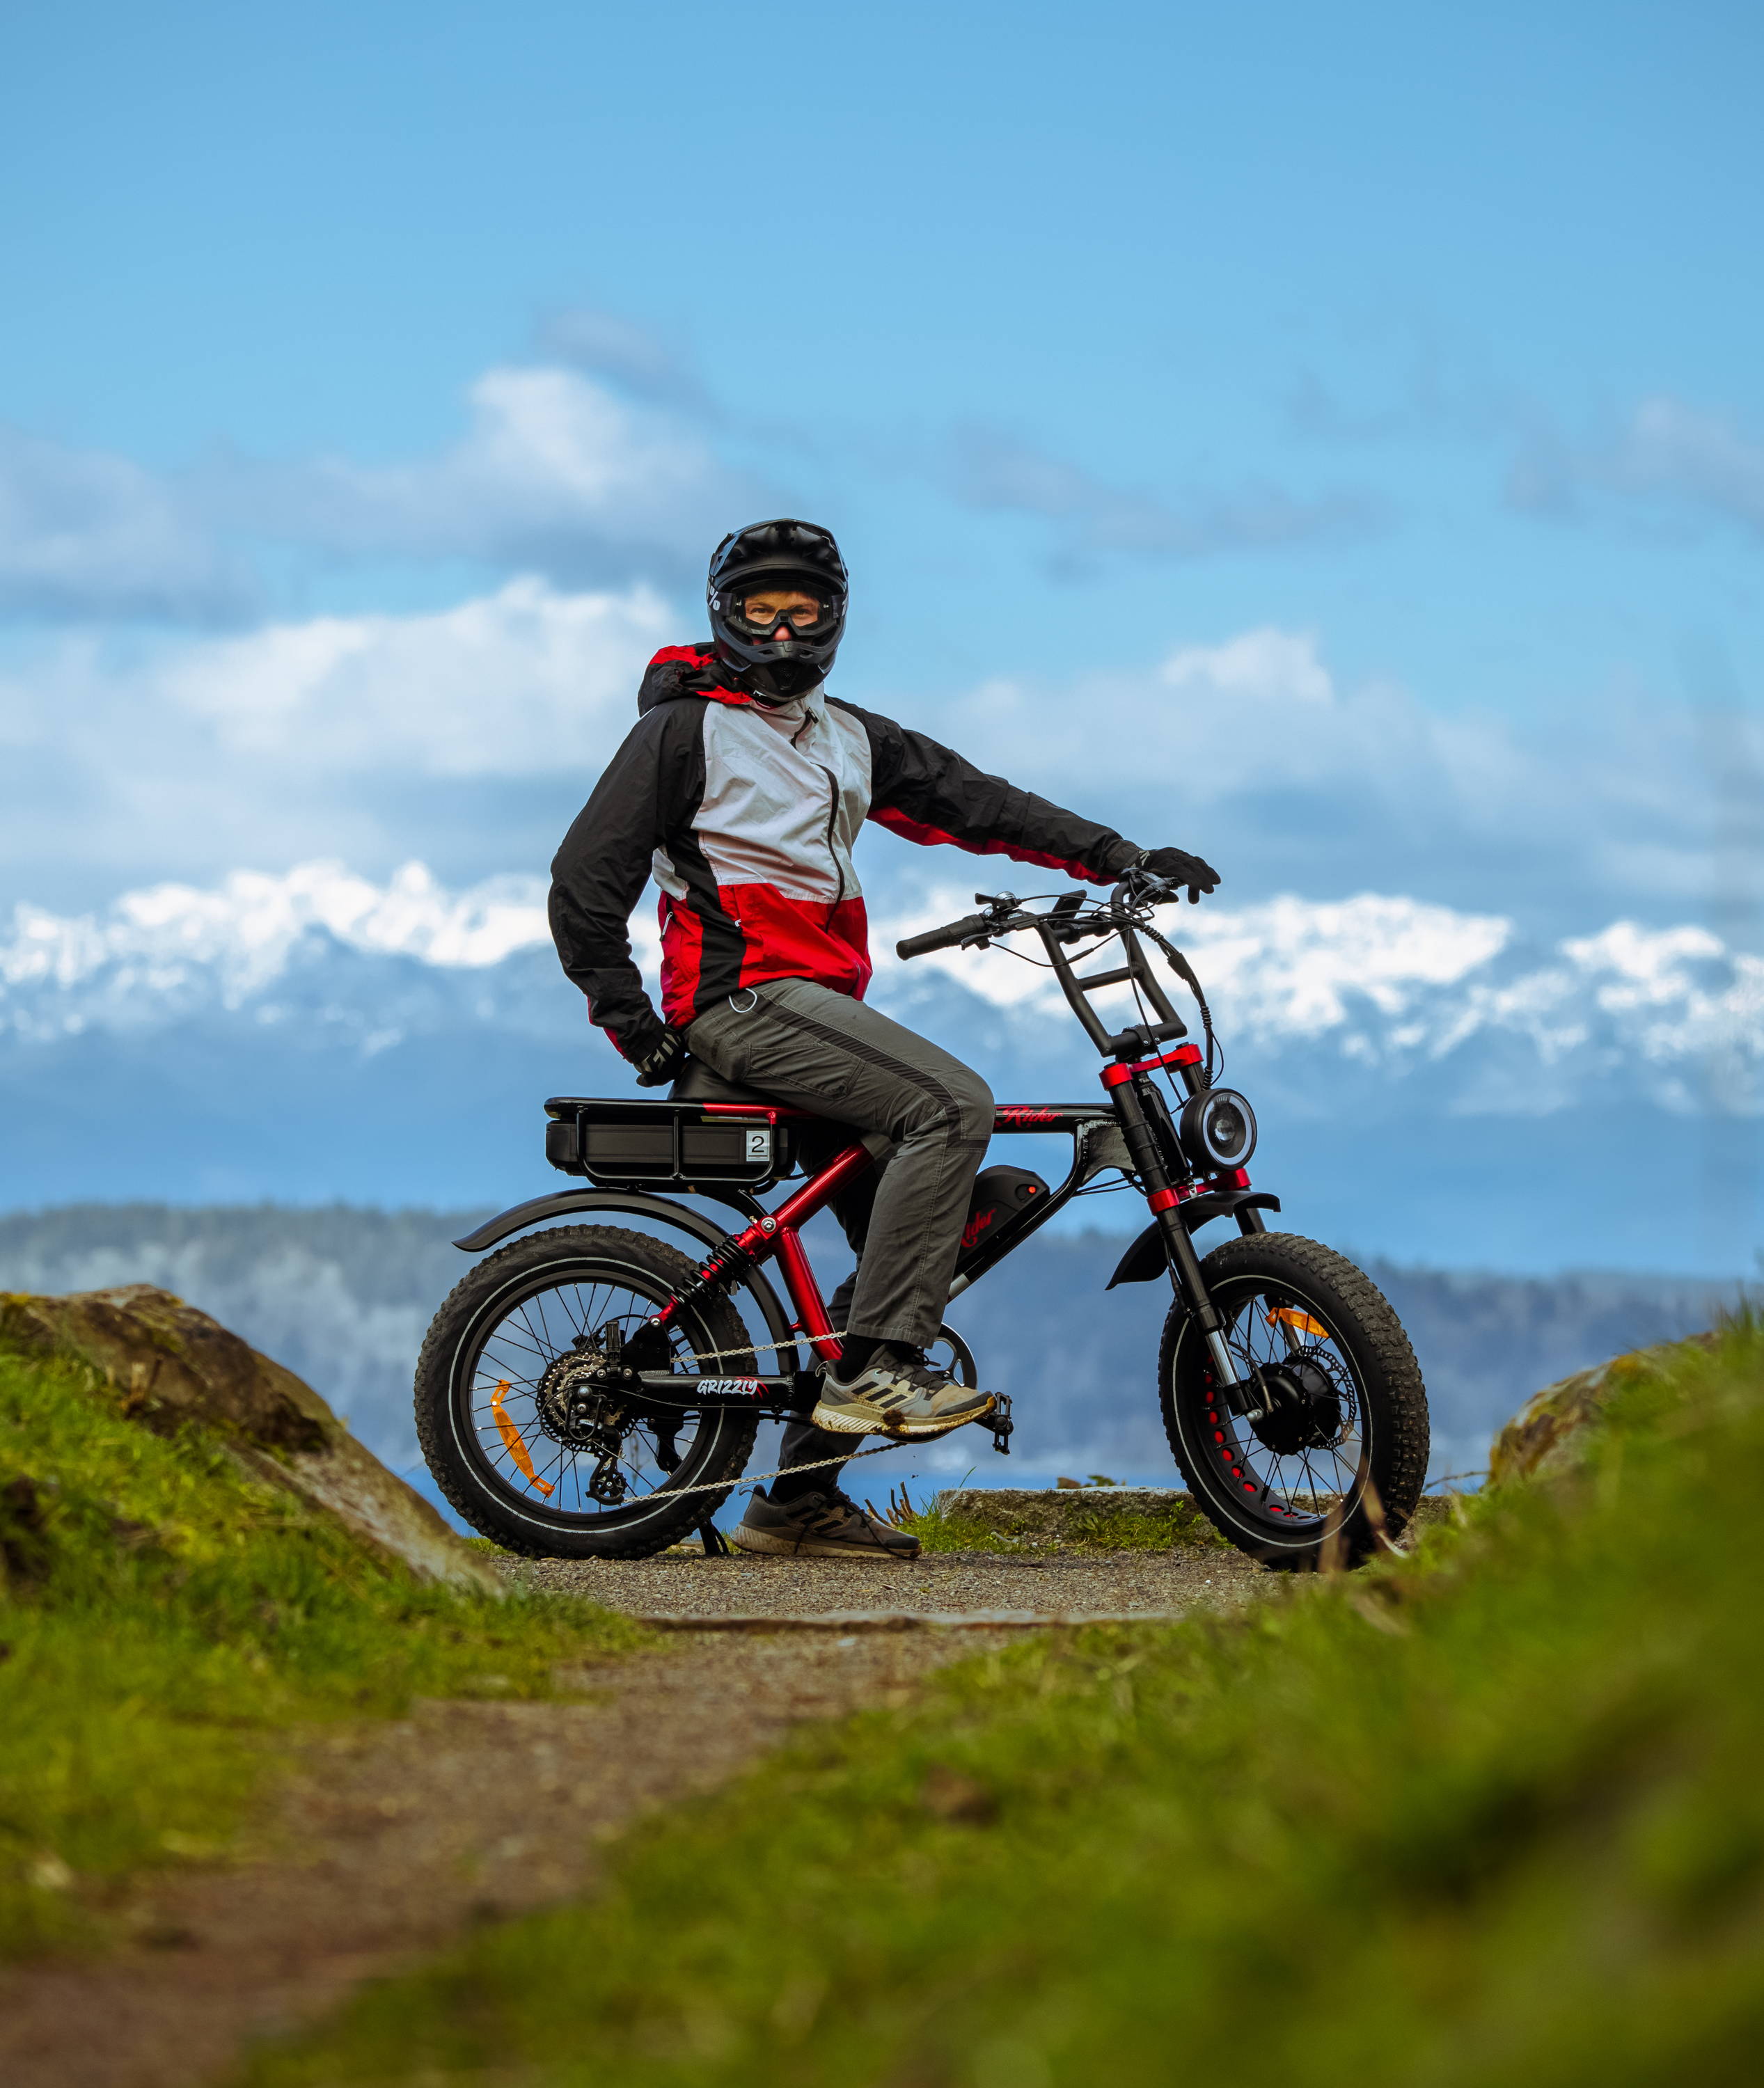 A view of the Grizzly electric bike from Ariel Rider, with a high-quality aluminum frame, powerful motor and advanced features for a superior riding experience.